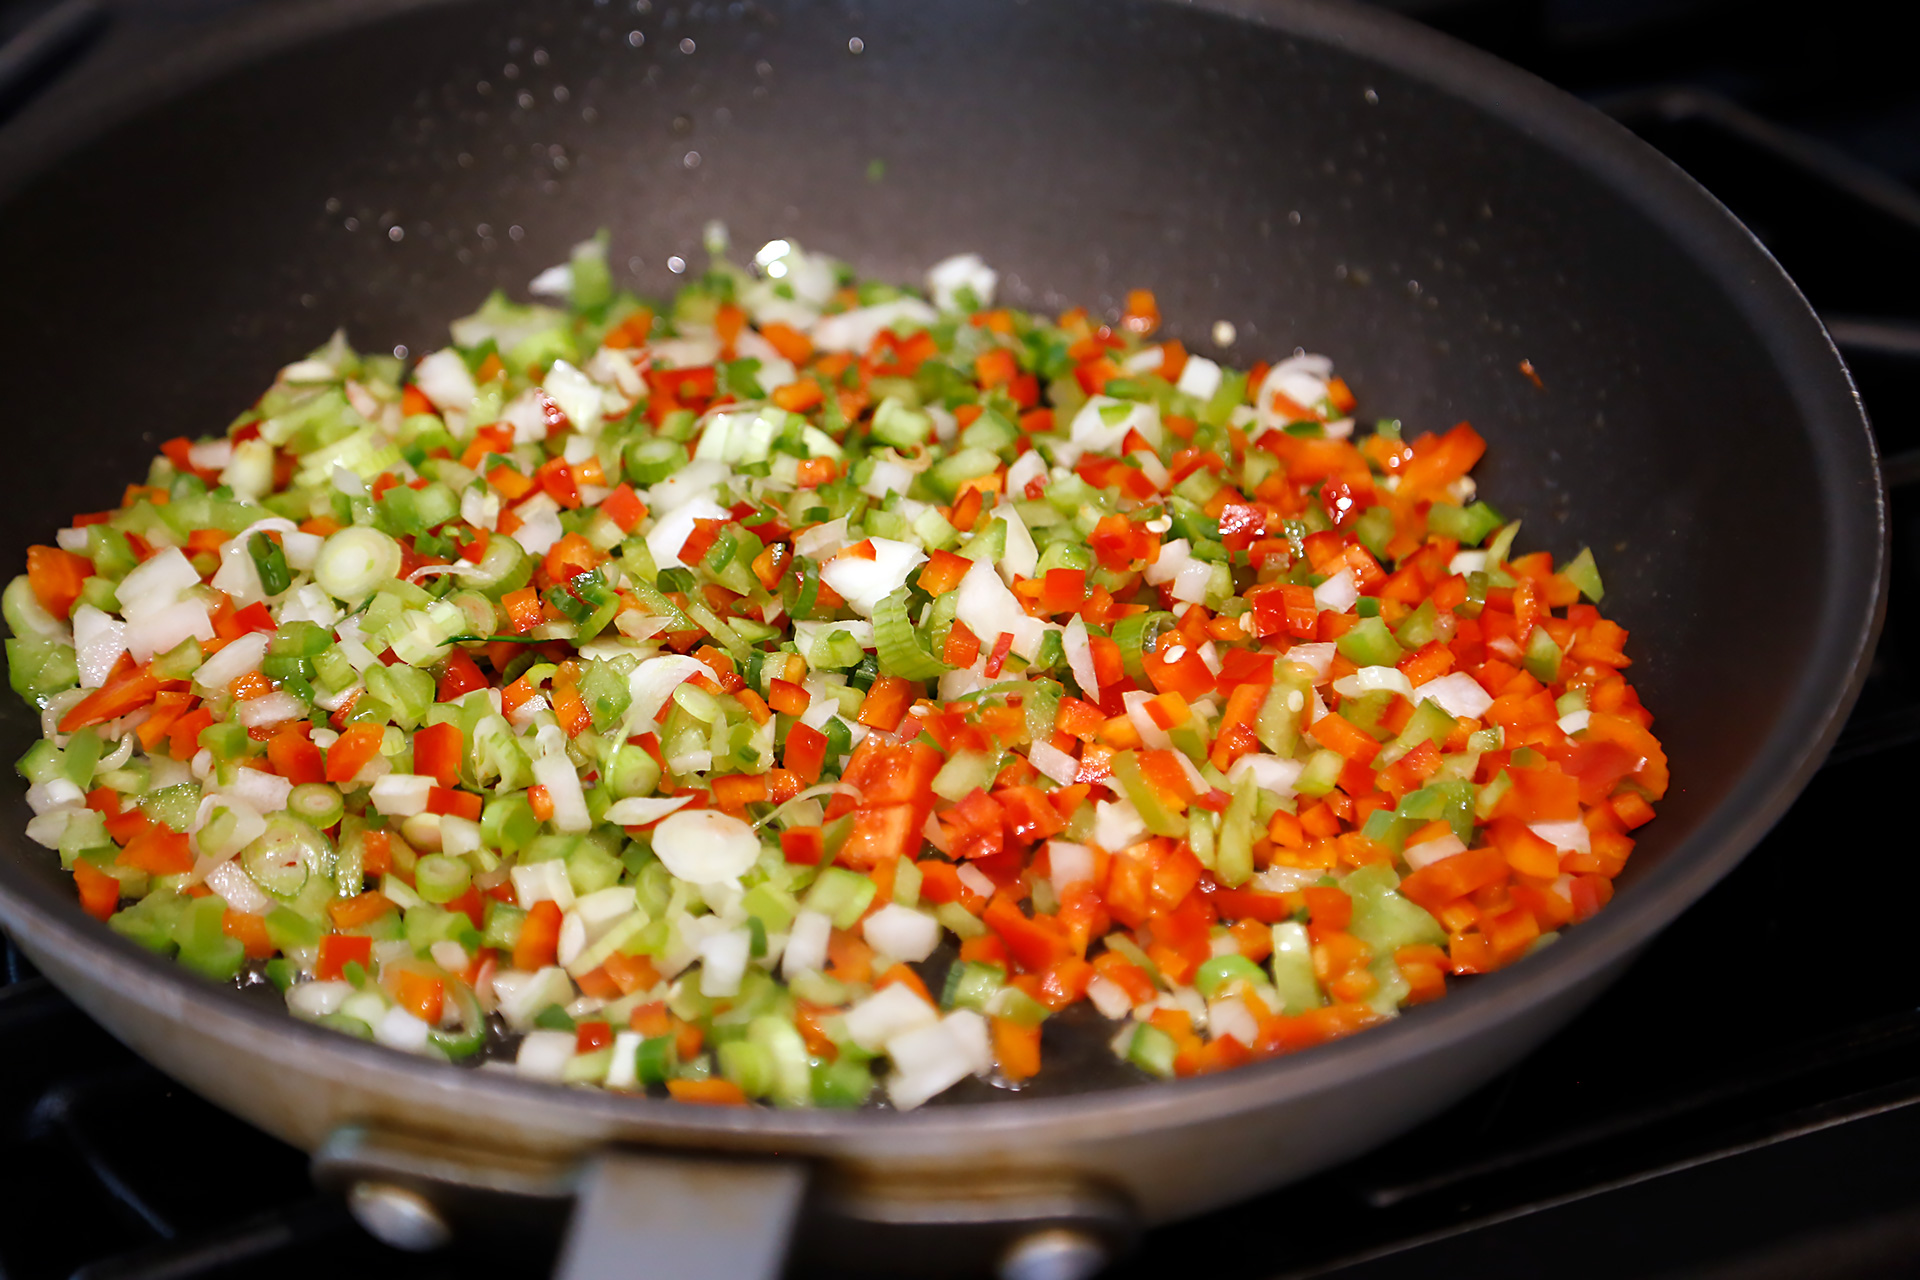 In a large skillet over medium-high heat, heat the oil. Add the onions, peppers, and jalapeño chile and cook, stirring until vegetables are soft but still have some crunch and integrity, add garlic to soften with other vegetables and cook about 10 minutes.